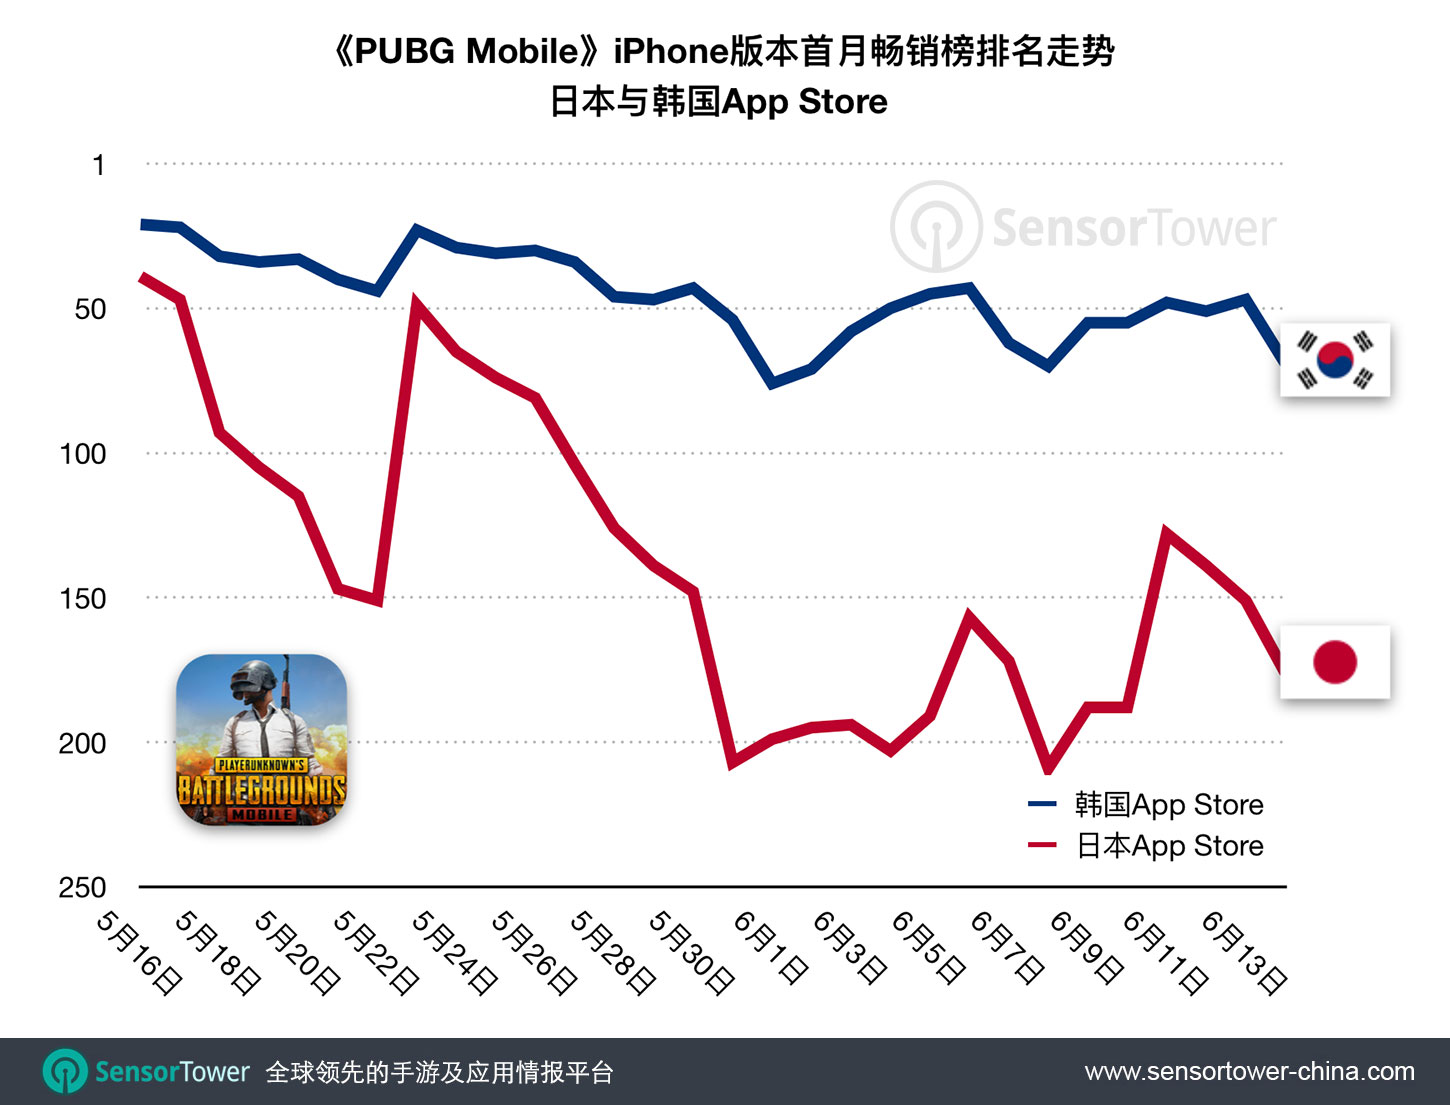 PUBG Mobile First 30-Day Revenue Category Rankings in Japan and Korea